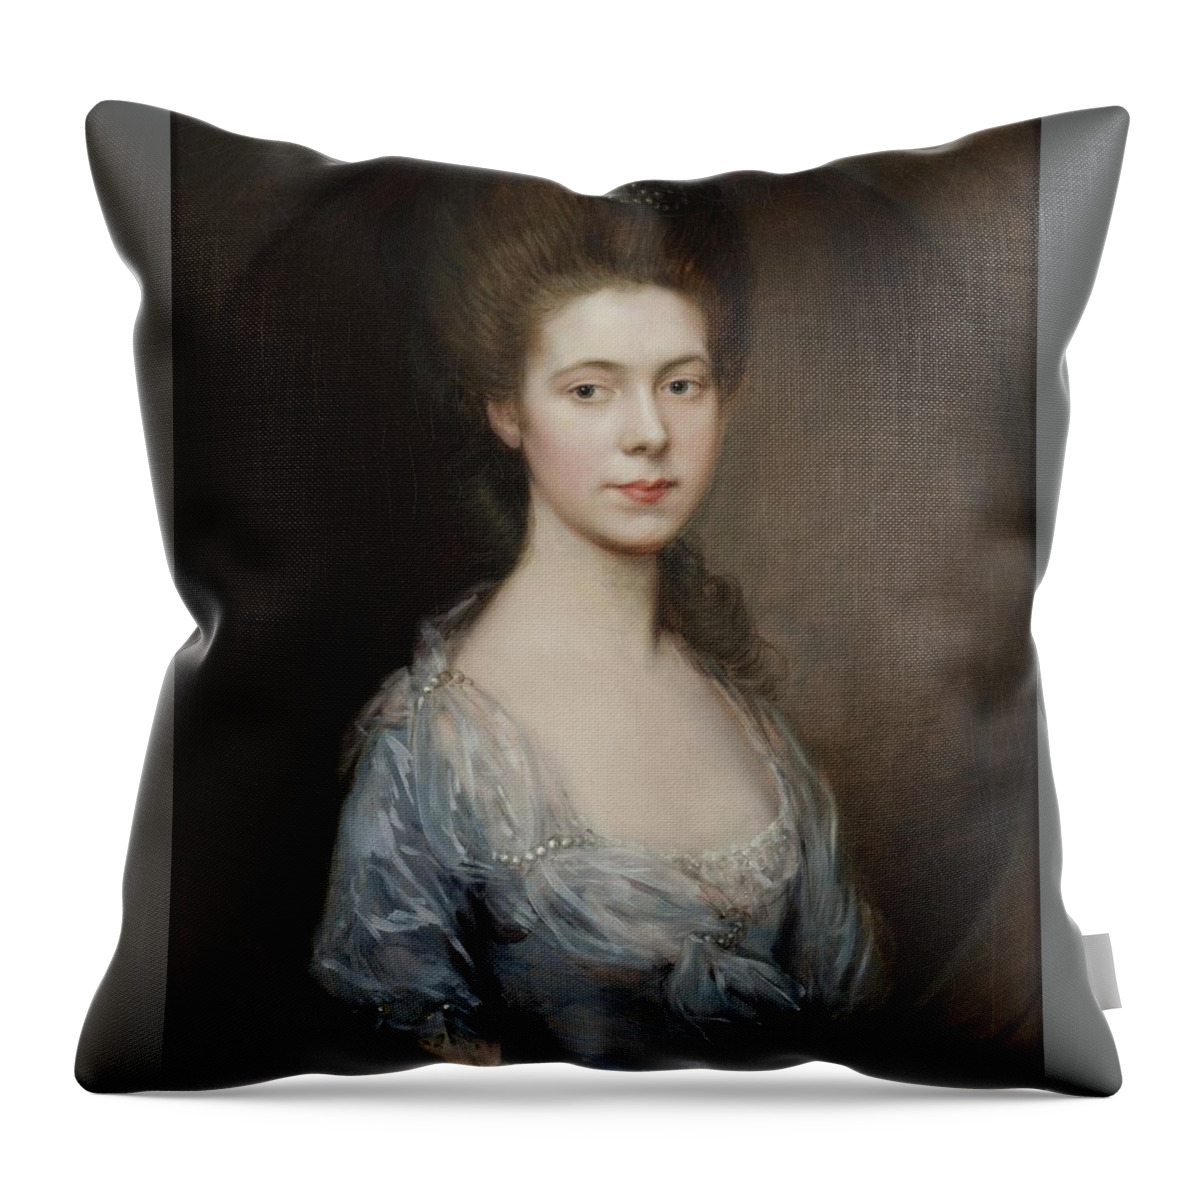 Thomas Gainsborough English 1727 - 1788 Mrs. George Oswald Throw Pillow featuring the painting George Oswald by Thomas